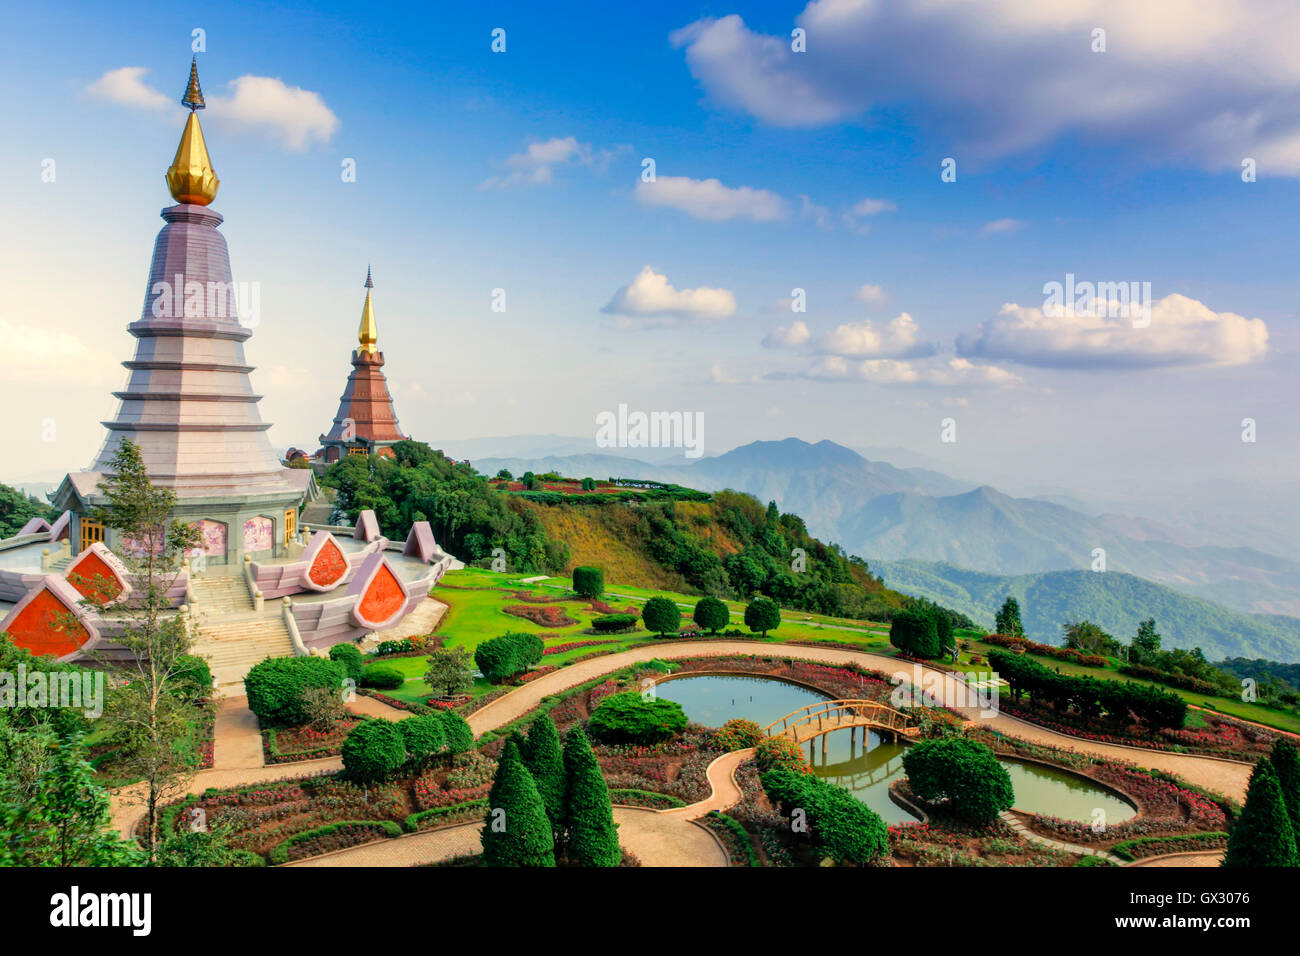 A view of Buddhist temples at Doi Inthanon National Park, near Chiang Mai in Northern Thailand Stock Photo